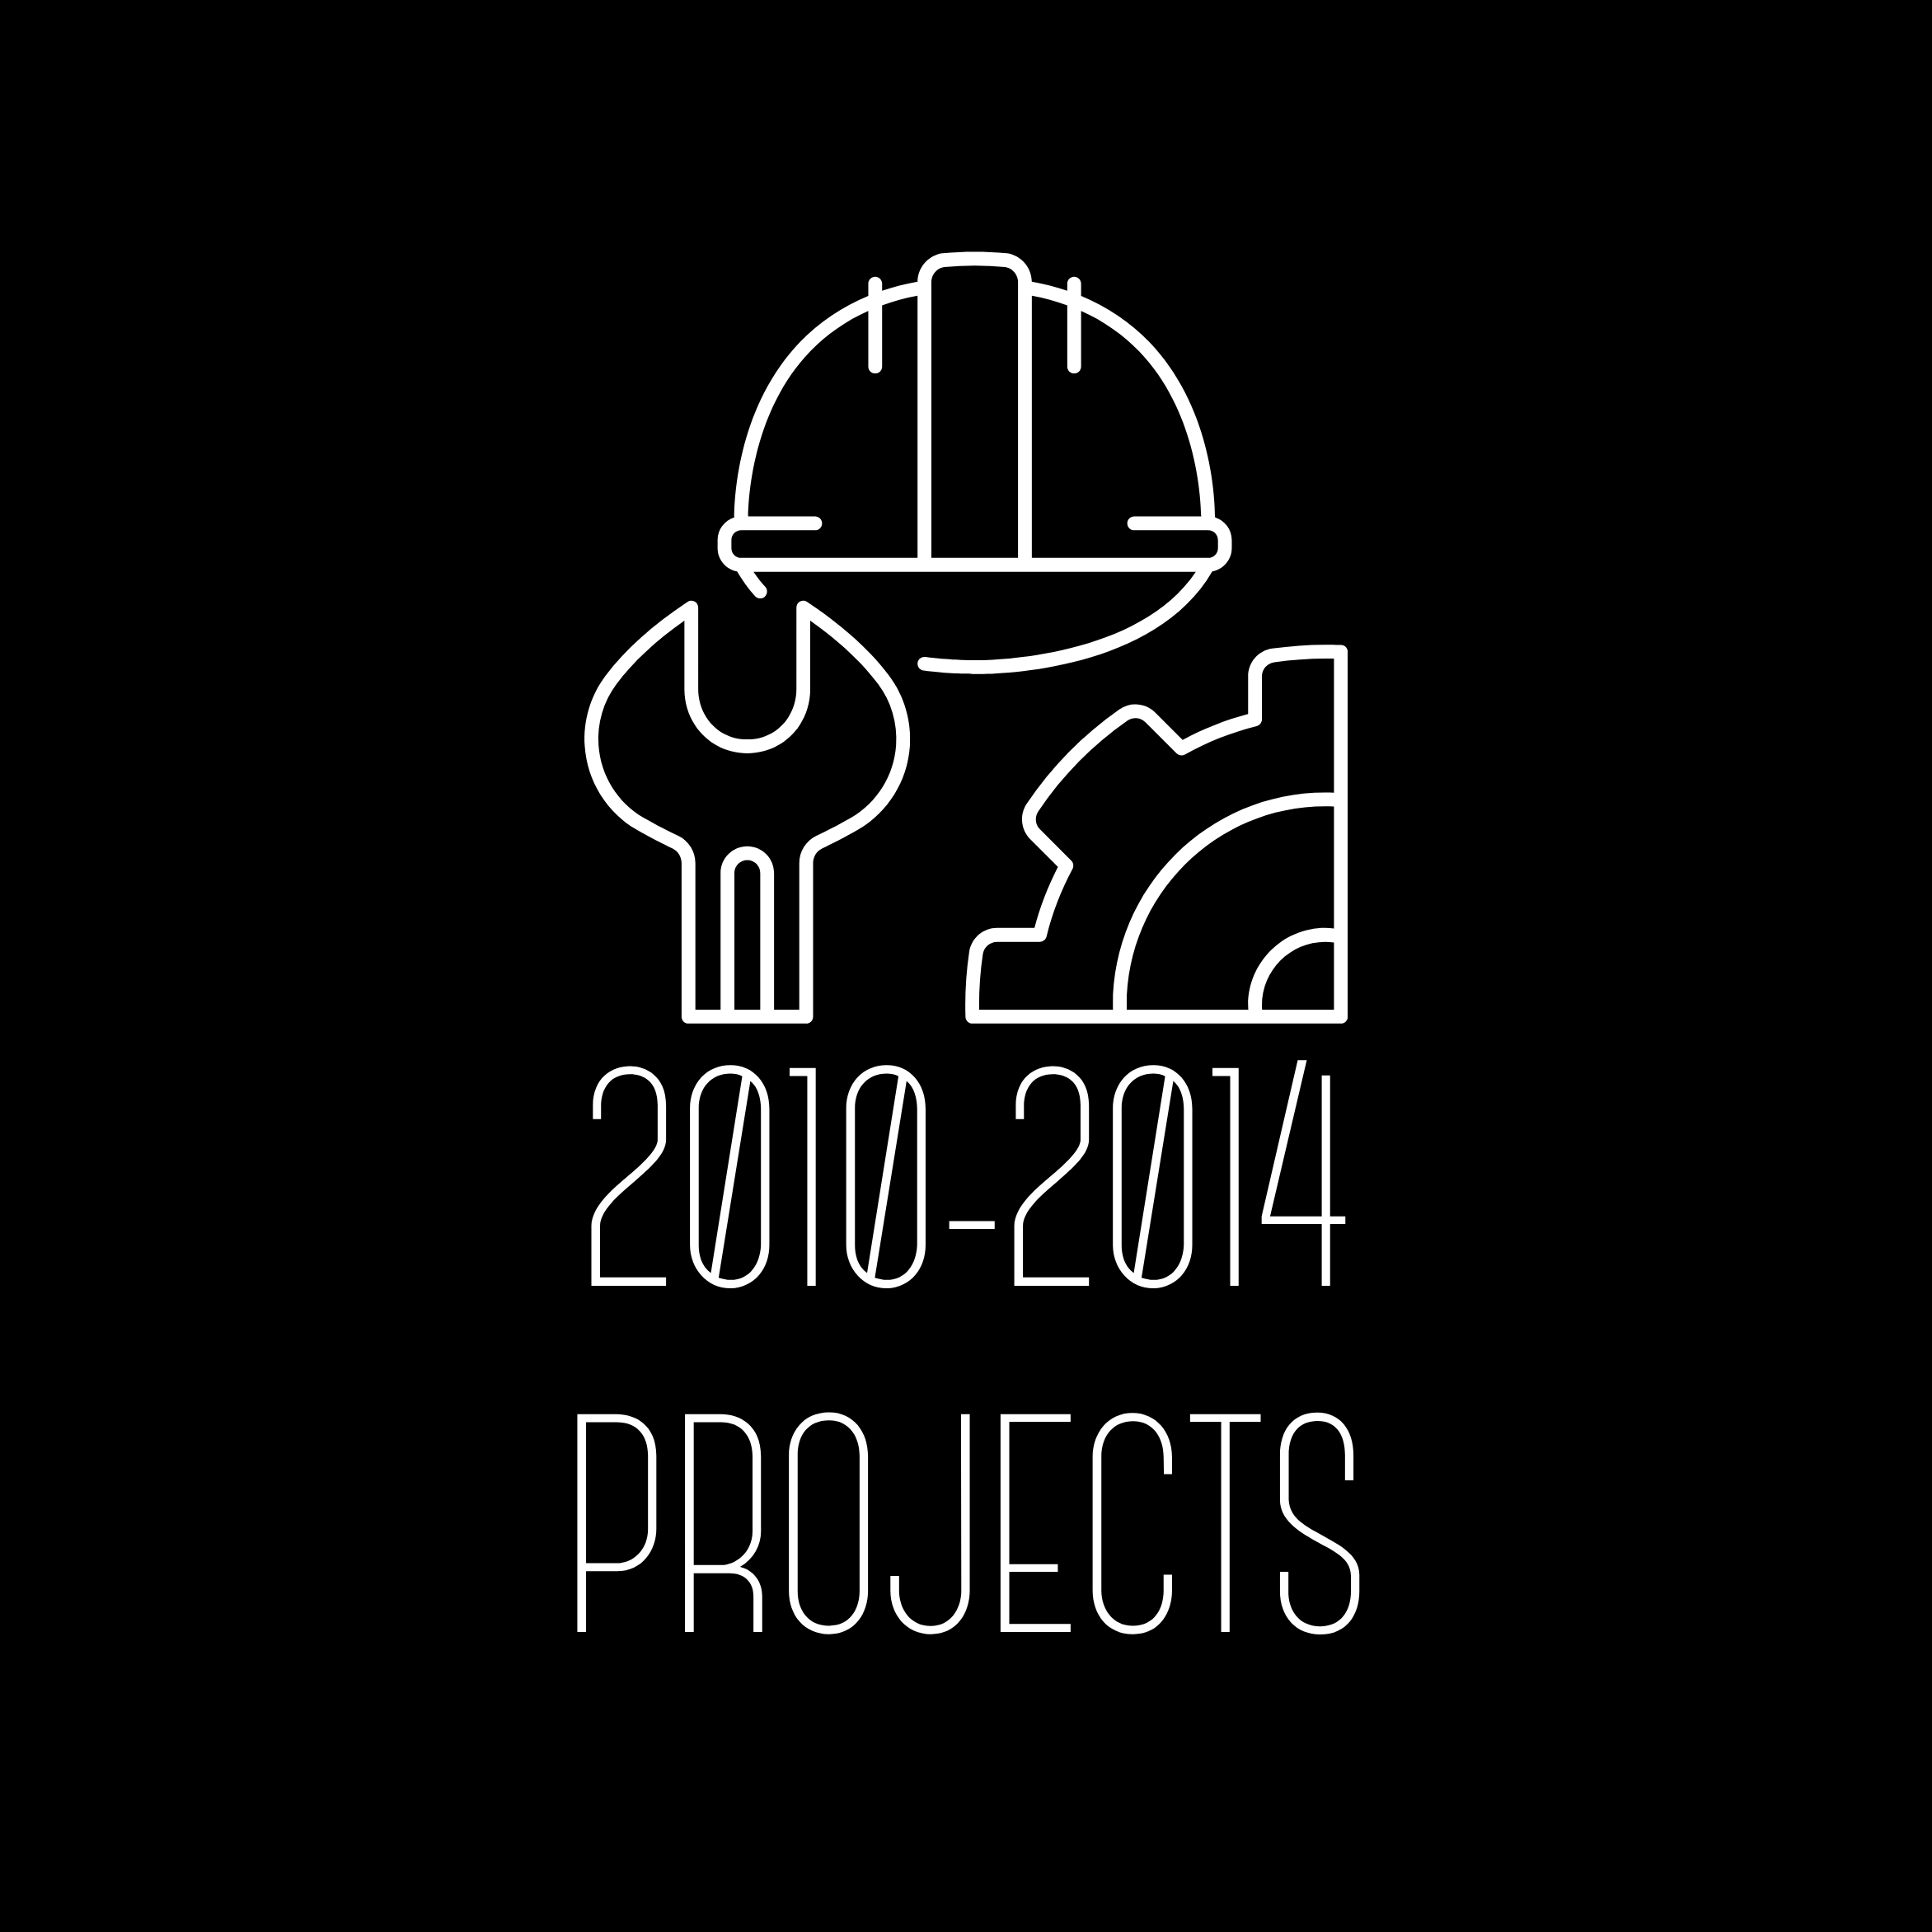 2010-2014 Projects